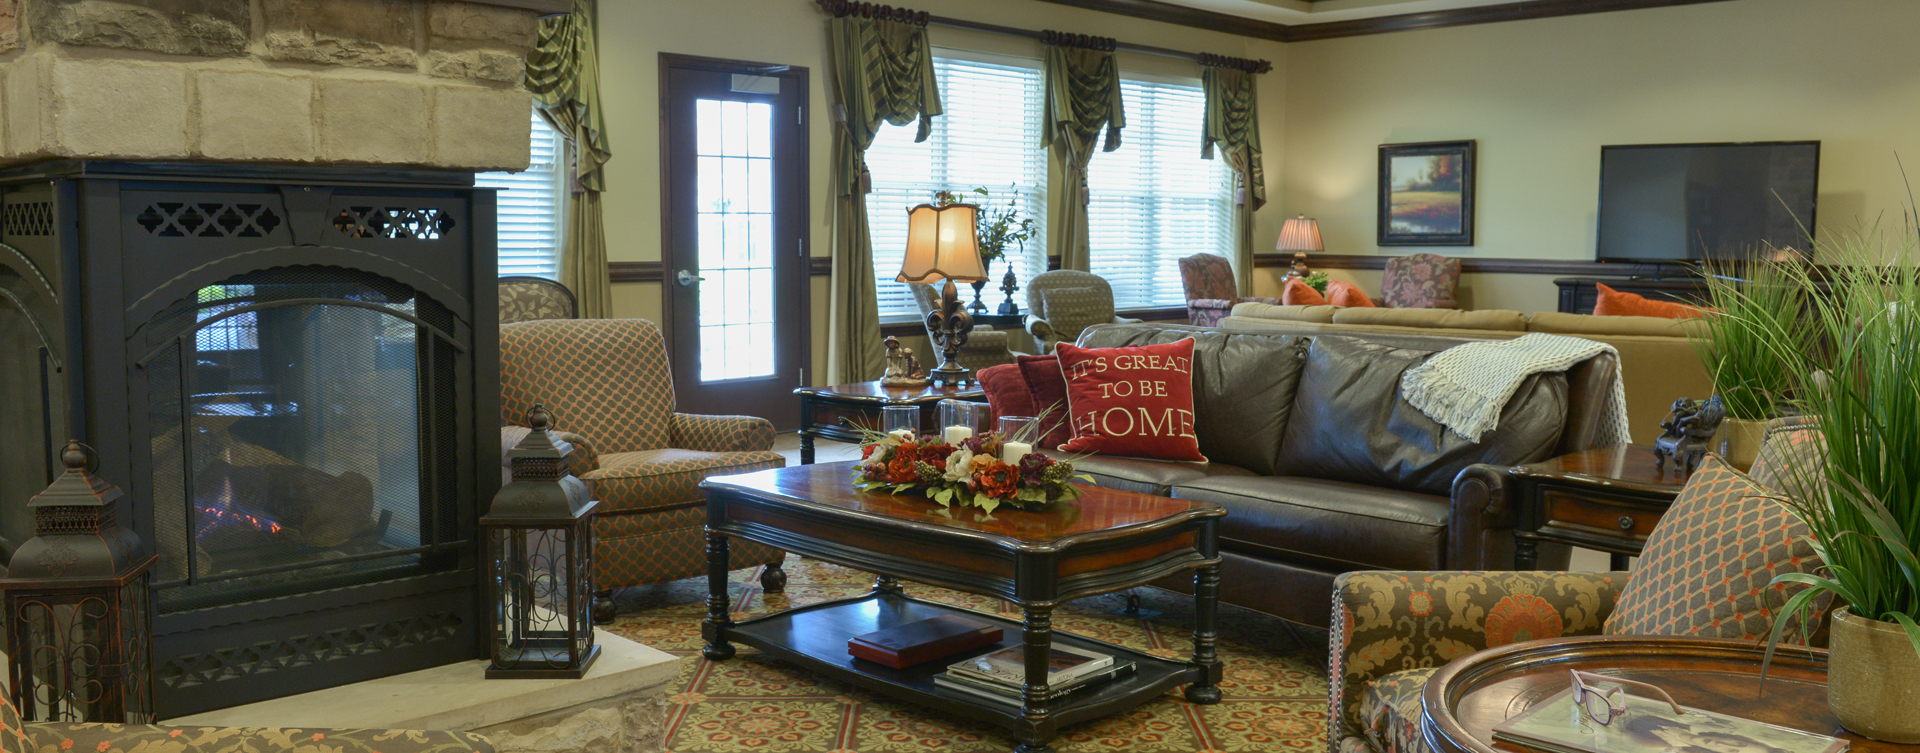 Socialize with friends in the living room at Bickford of Crown Point